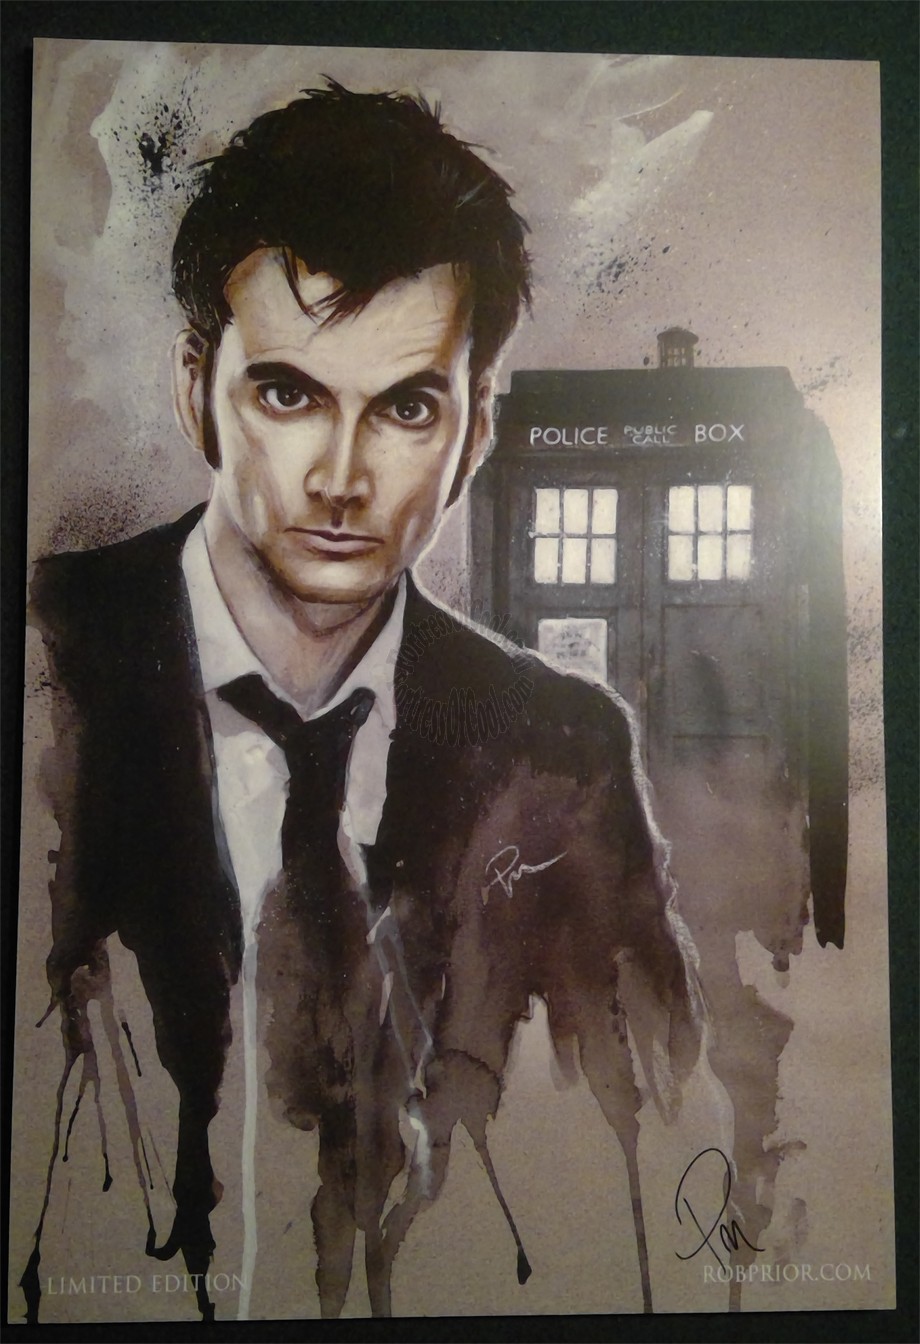 DOCTOR WHO - David Tennant Print - HAND SIGNED BY ARTIST ROB PRIOR